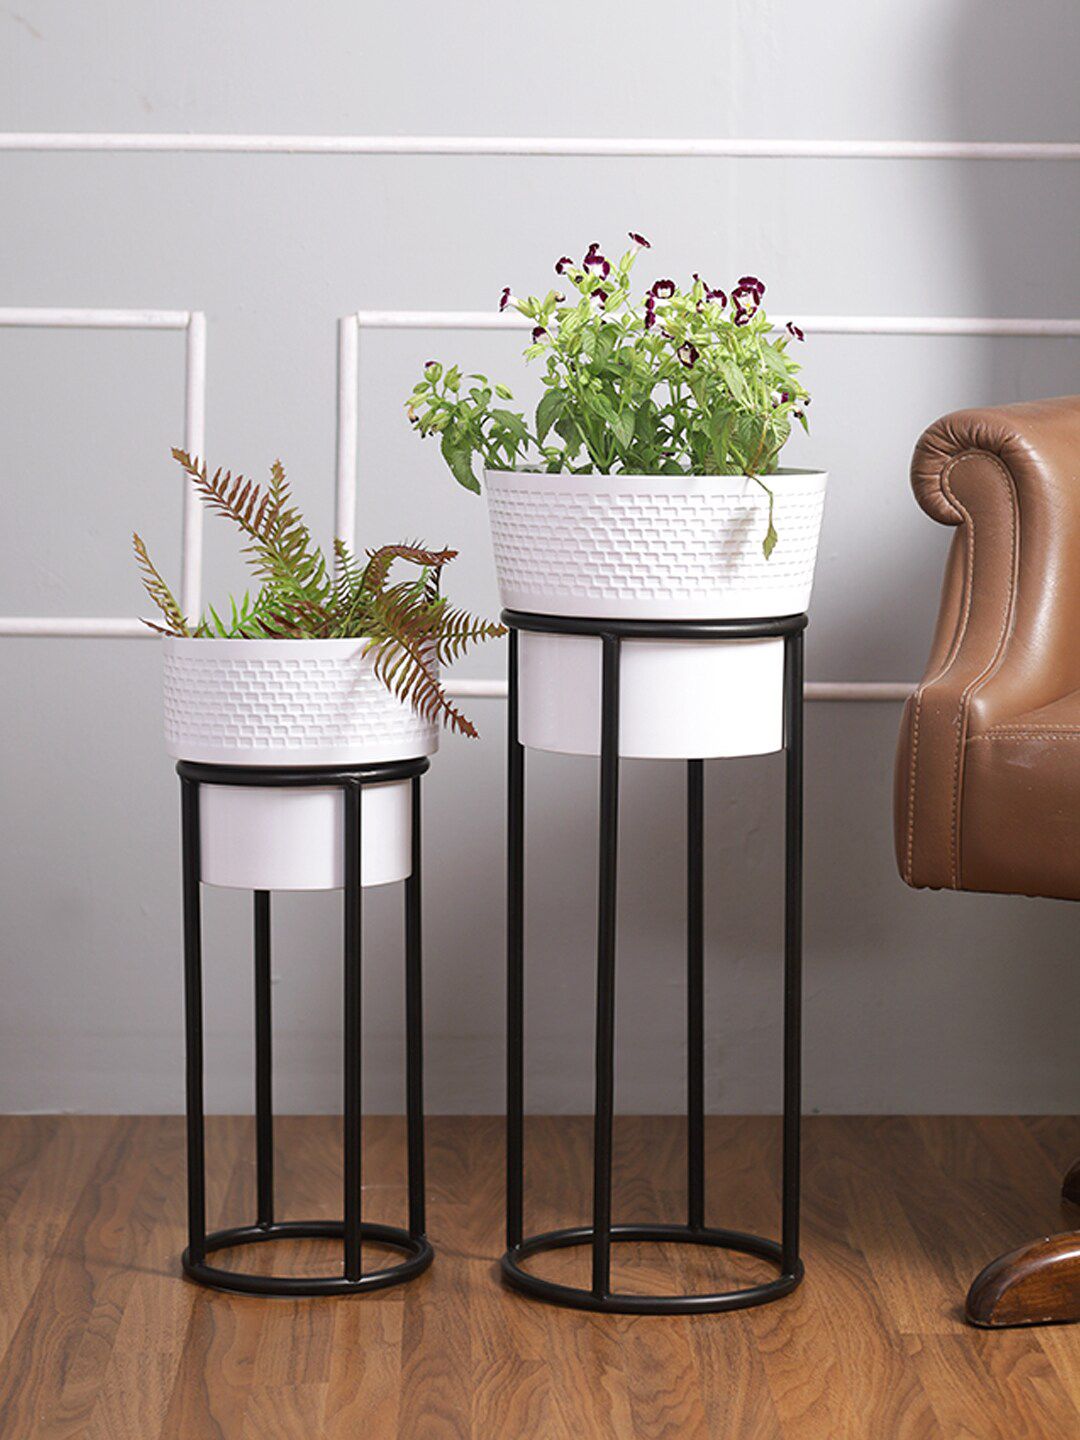 Aapno Rajasthan Set Of 2 Solid Ceramic Planters With Metal Stand Price in India